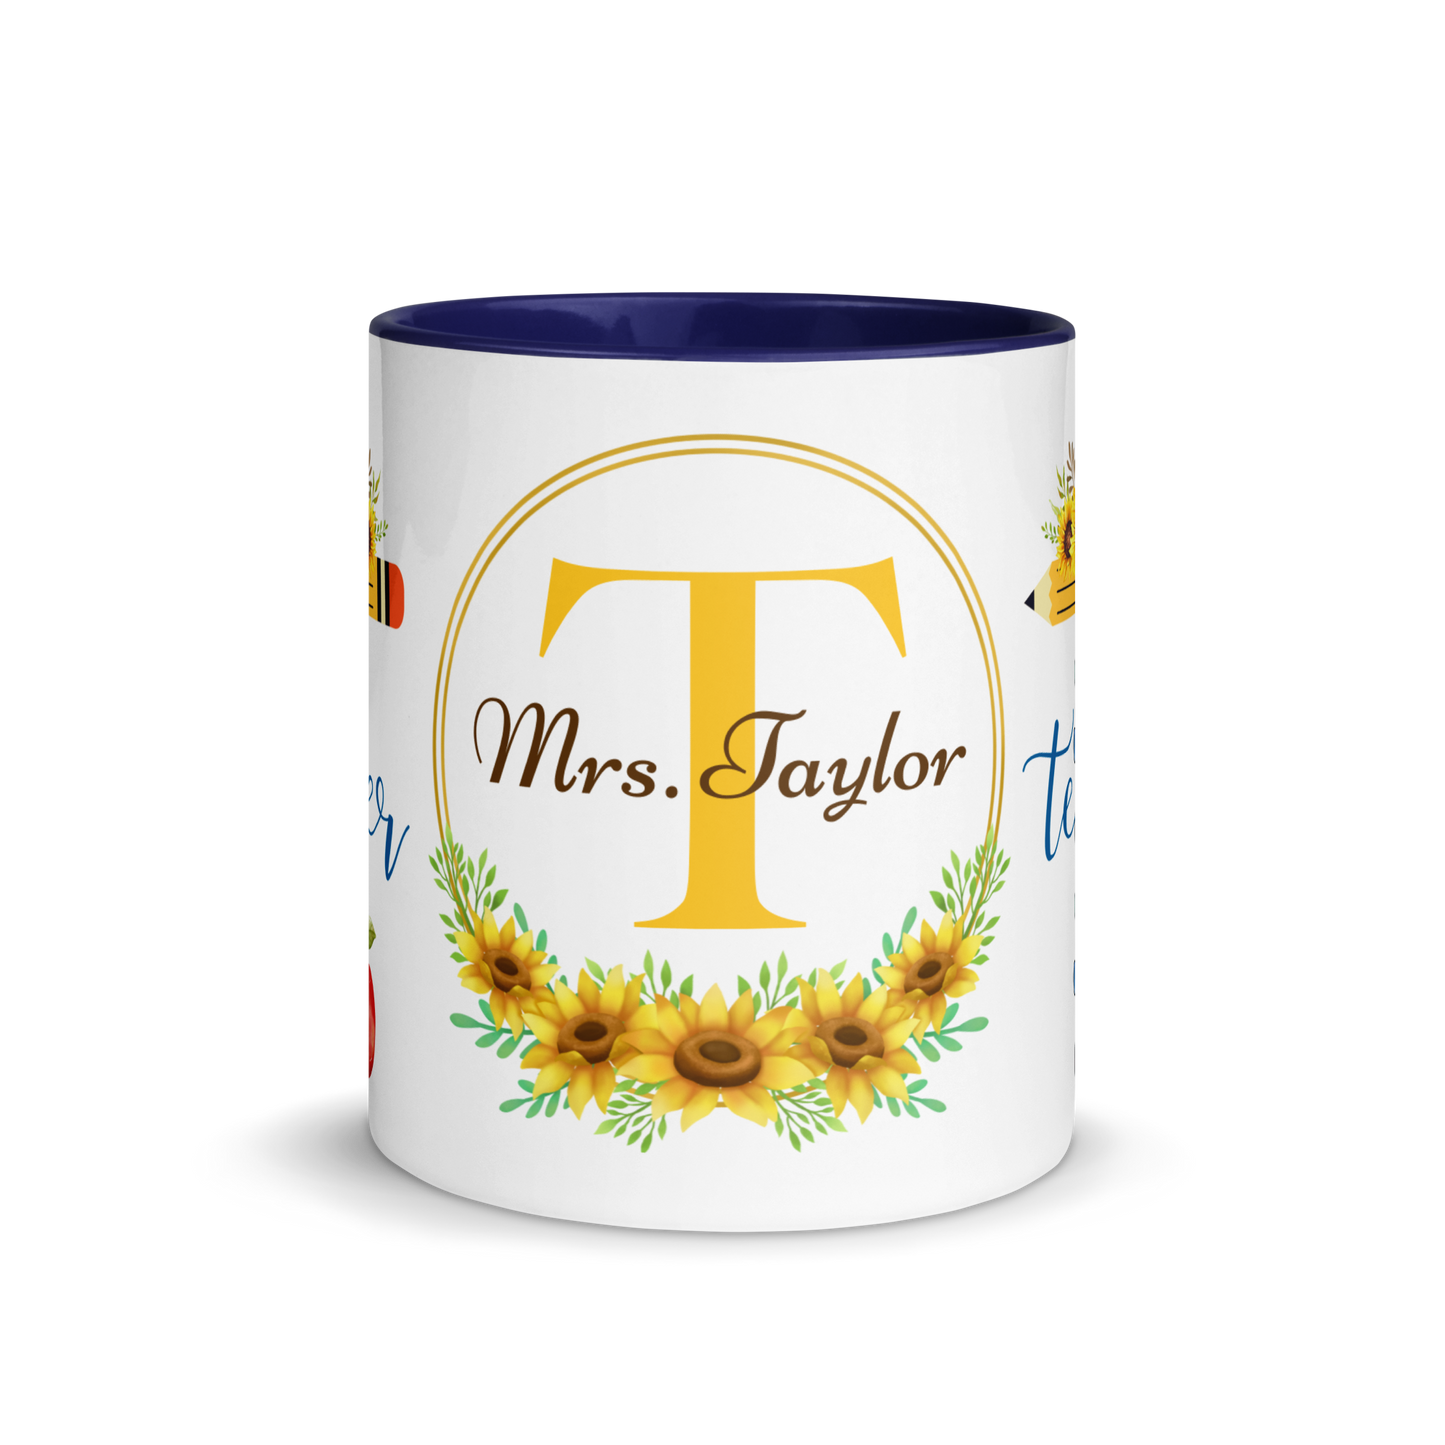 Personalized Coffee Mug 11oz | T is for Teacher Floral Themed